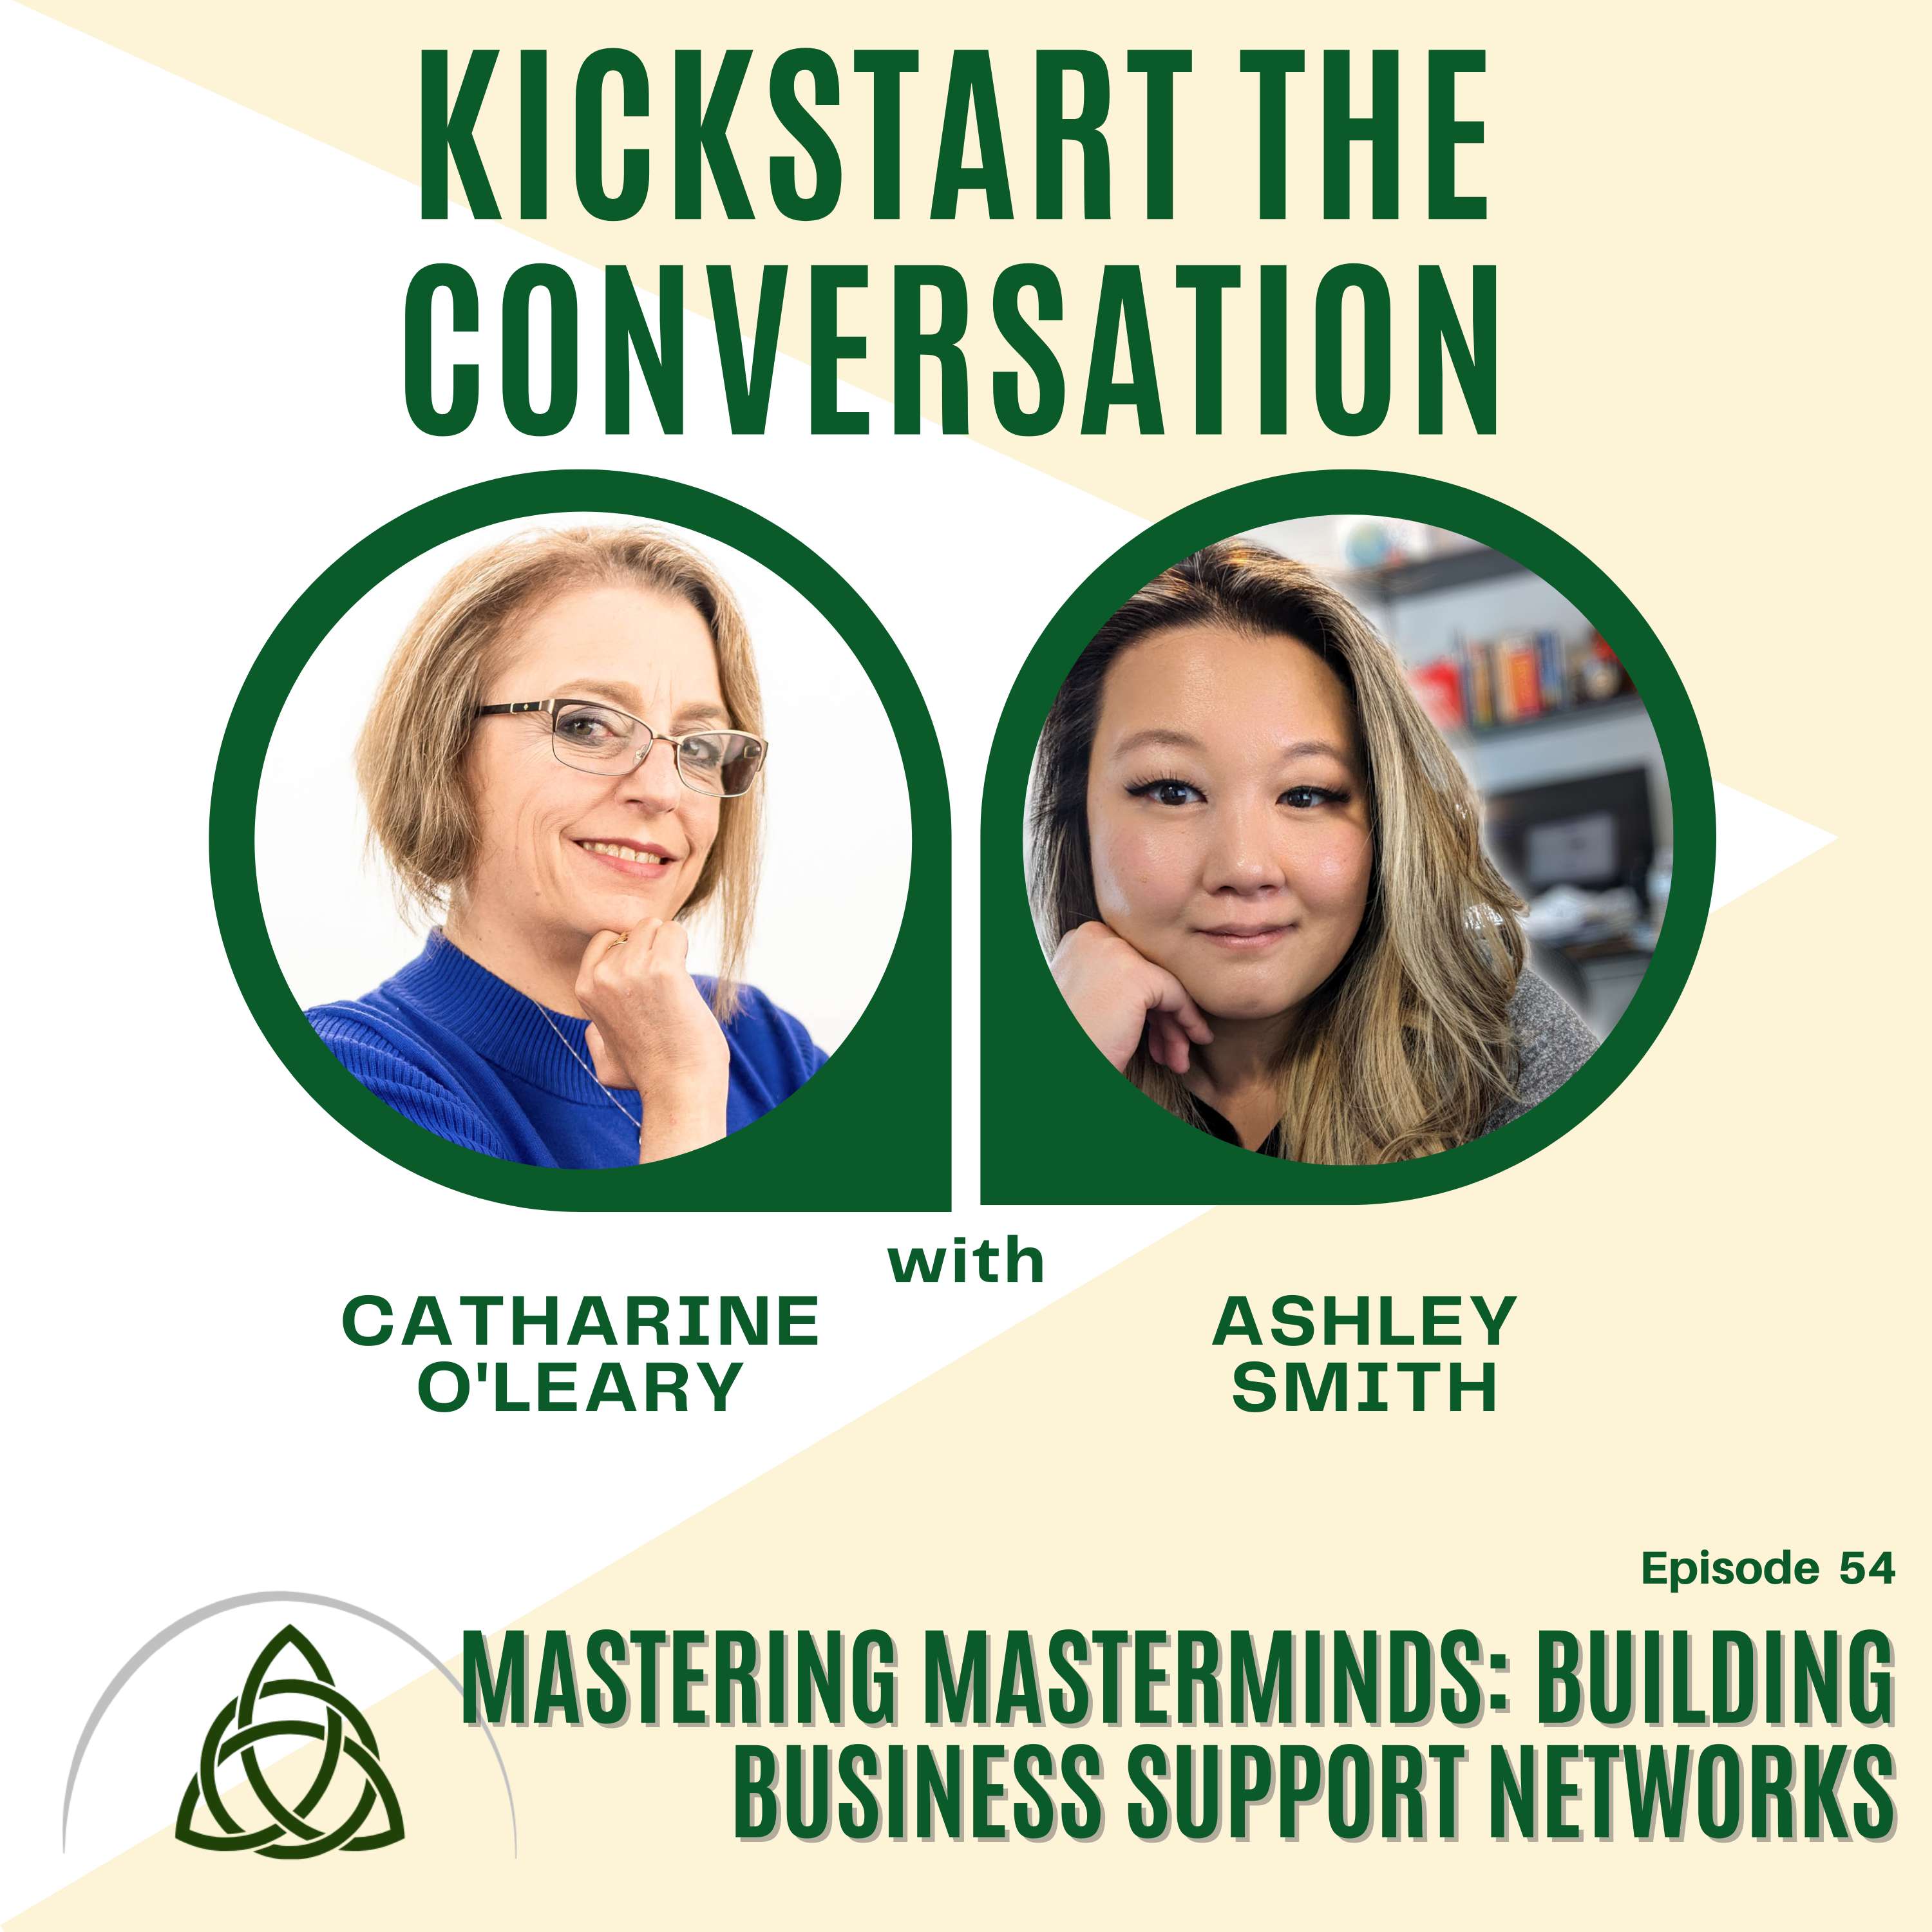 Mastering Masterminds: Building Business Support Networks with Ashley Smith